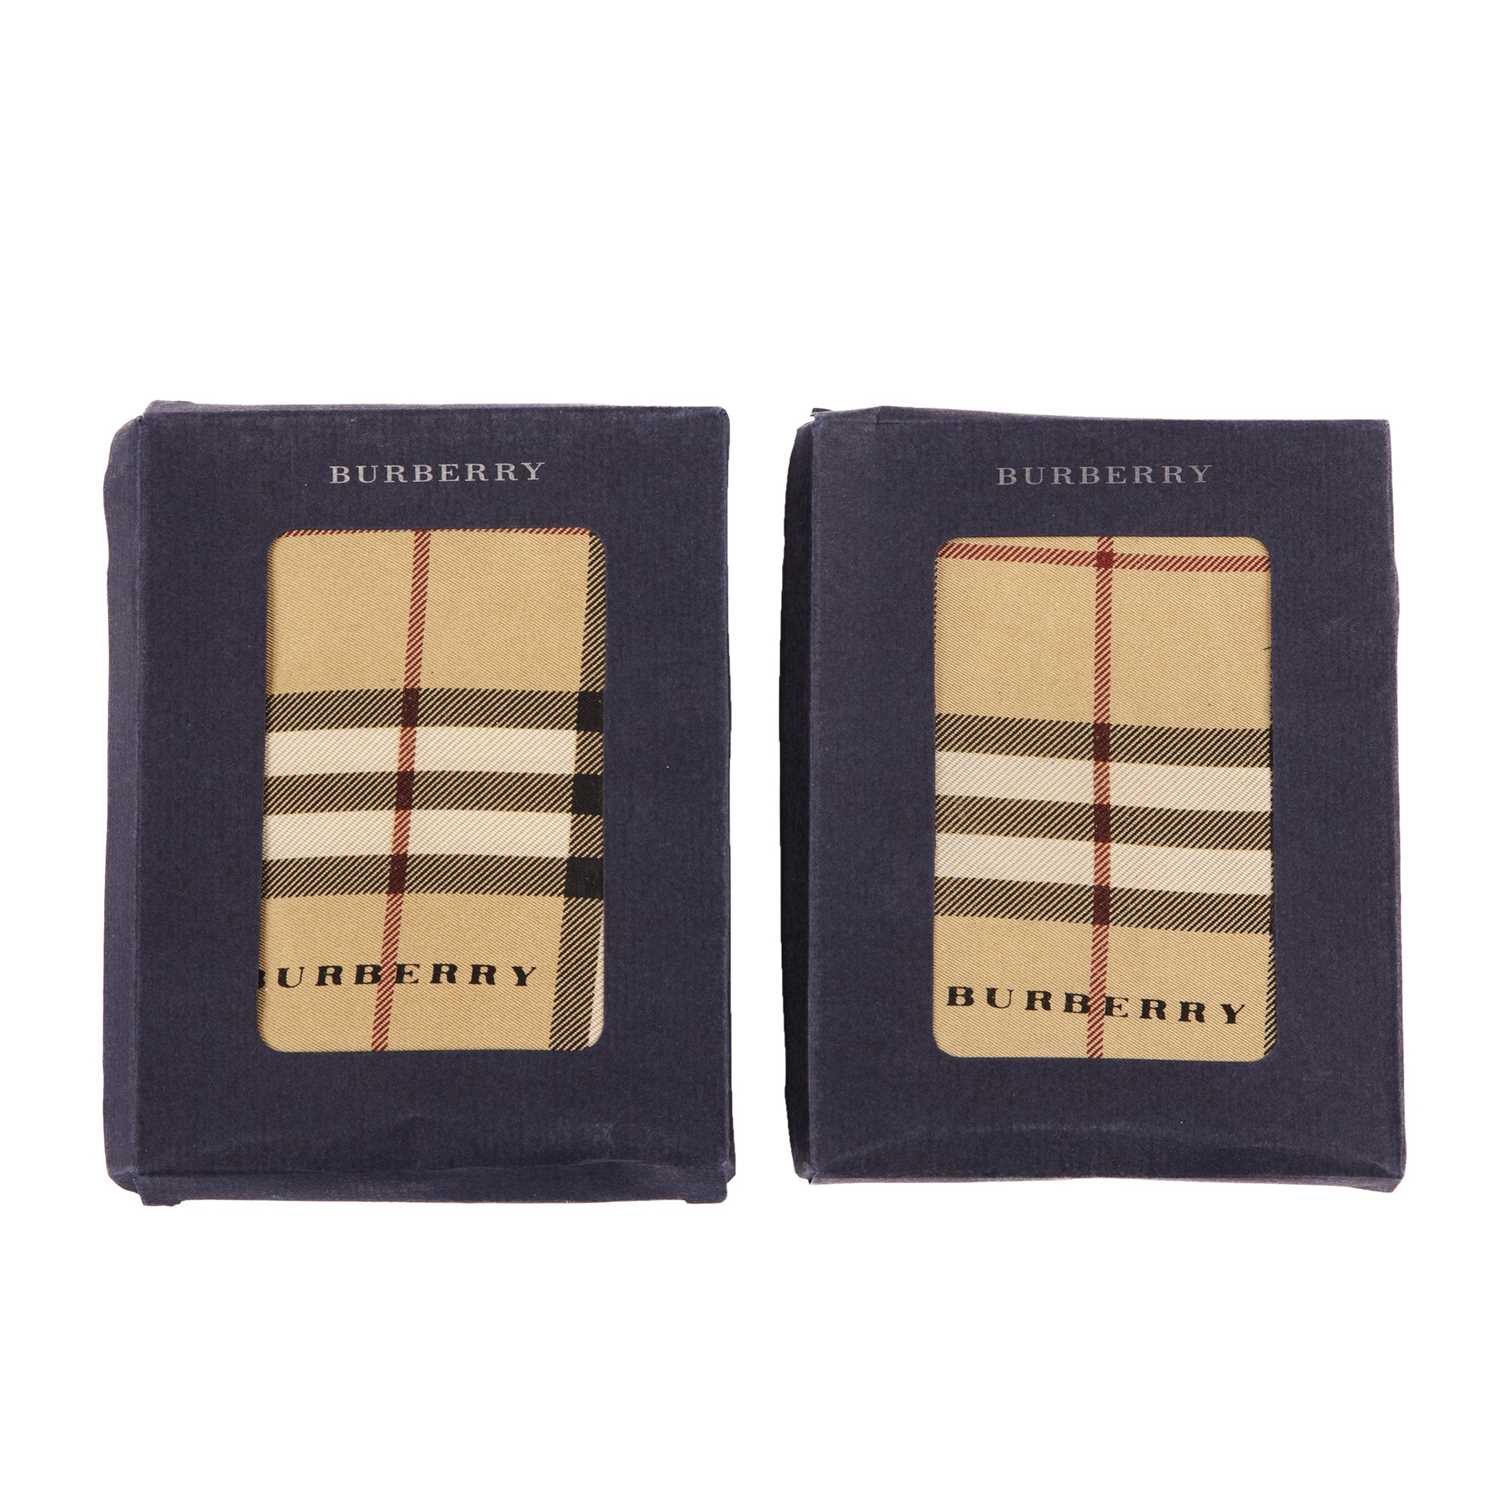 Burberry, two Nova Check silk handkerchiefs, with hand-rolled edges, measuring 47 by 47cm, with - Image 2 of 6